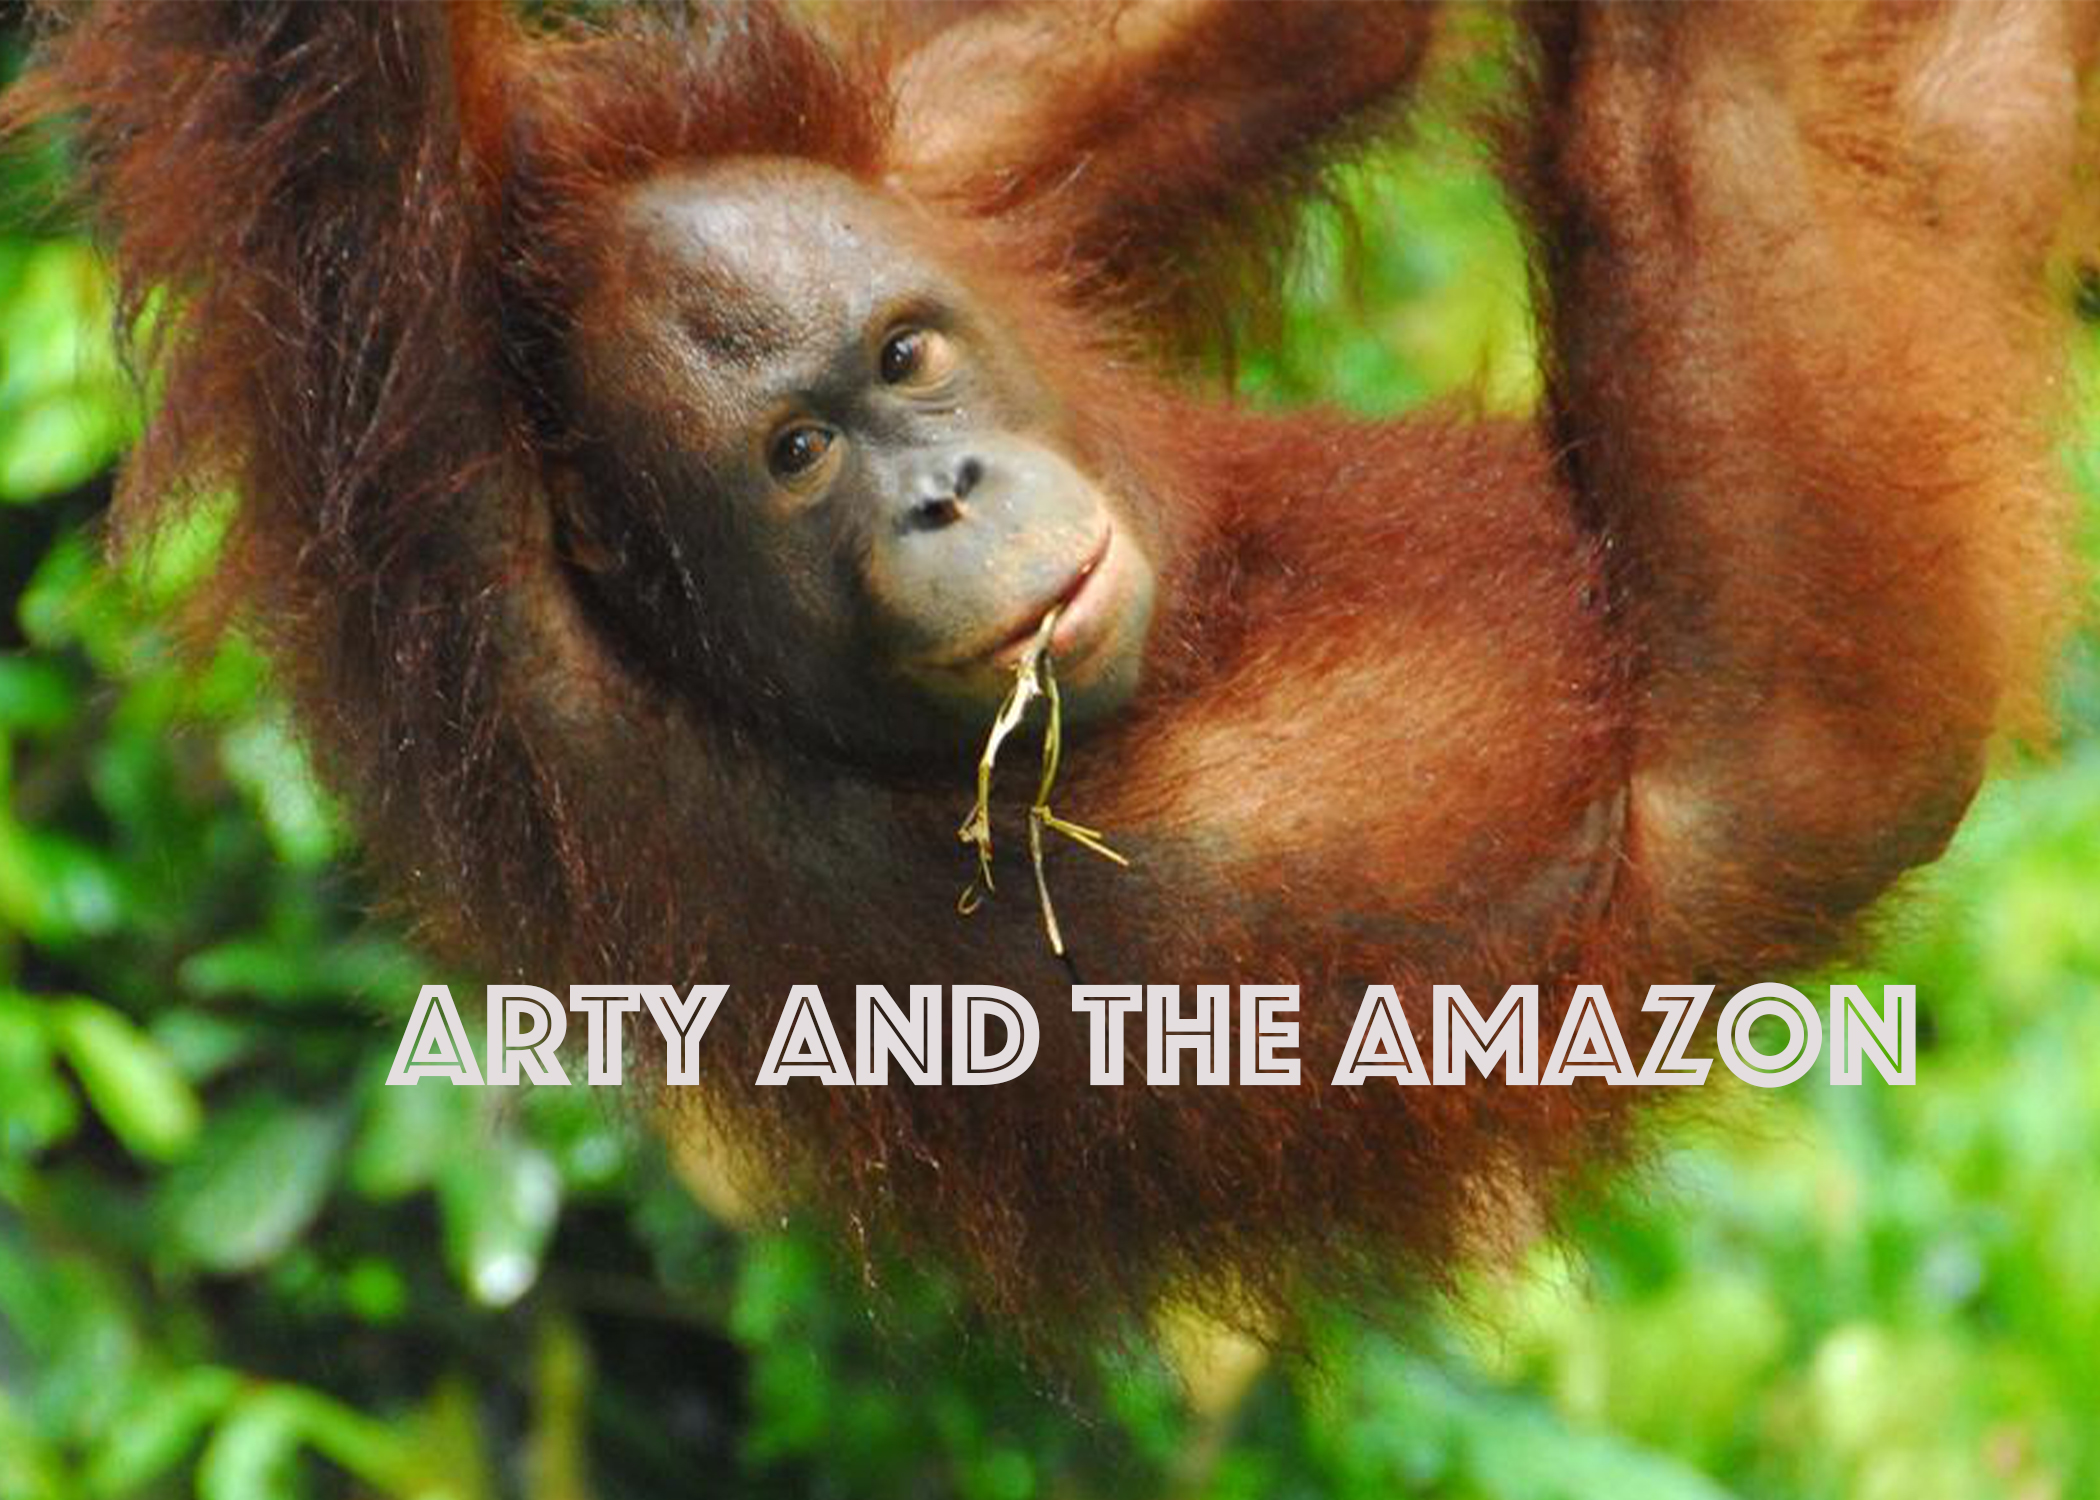 Arty and the Amazon